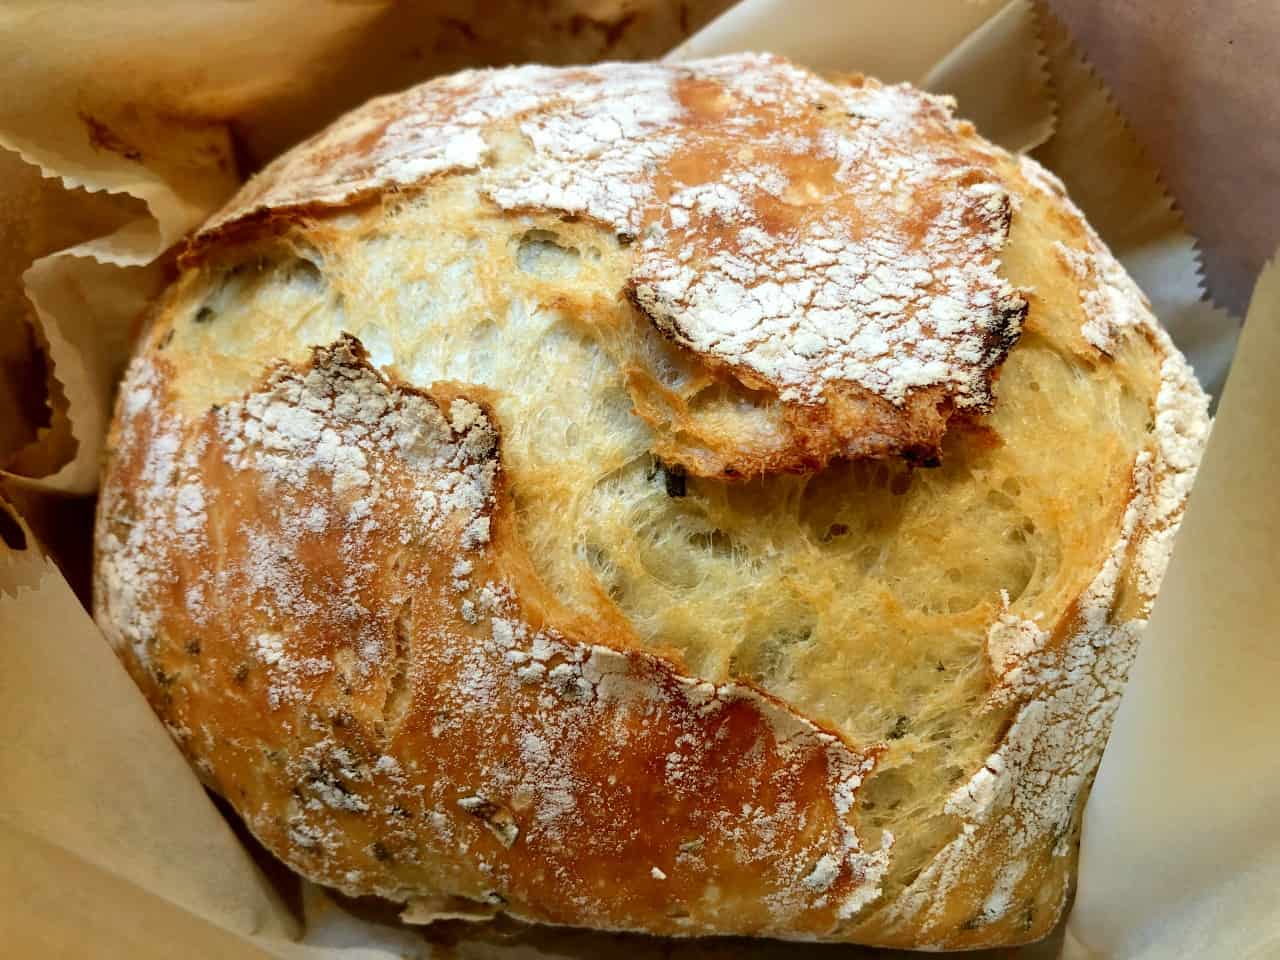 rosemary no-knead bread baked in a dutch oven.